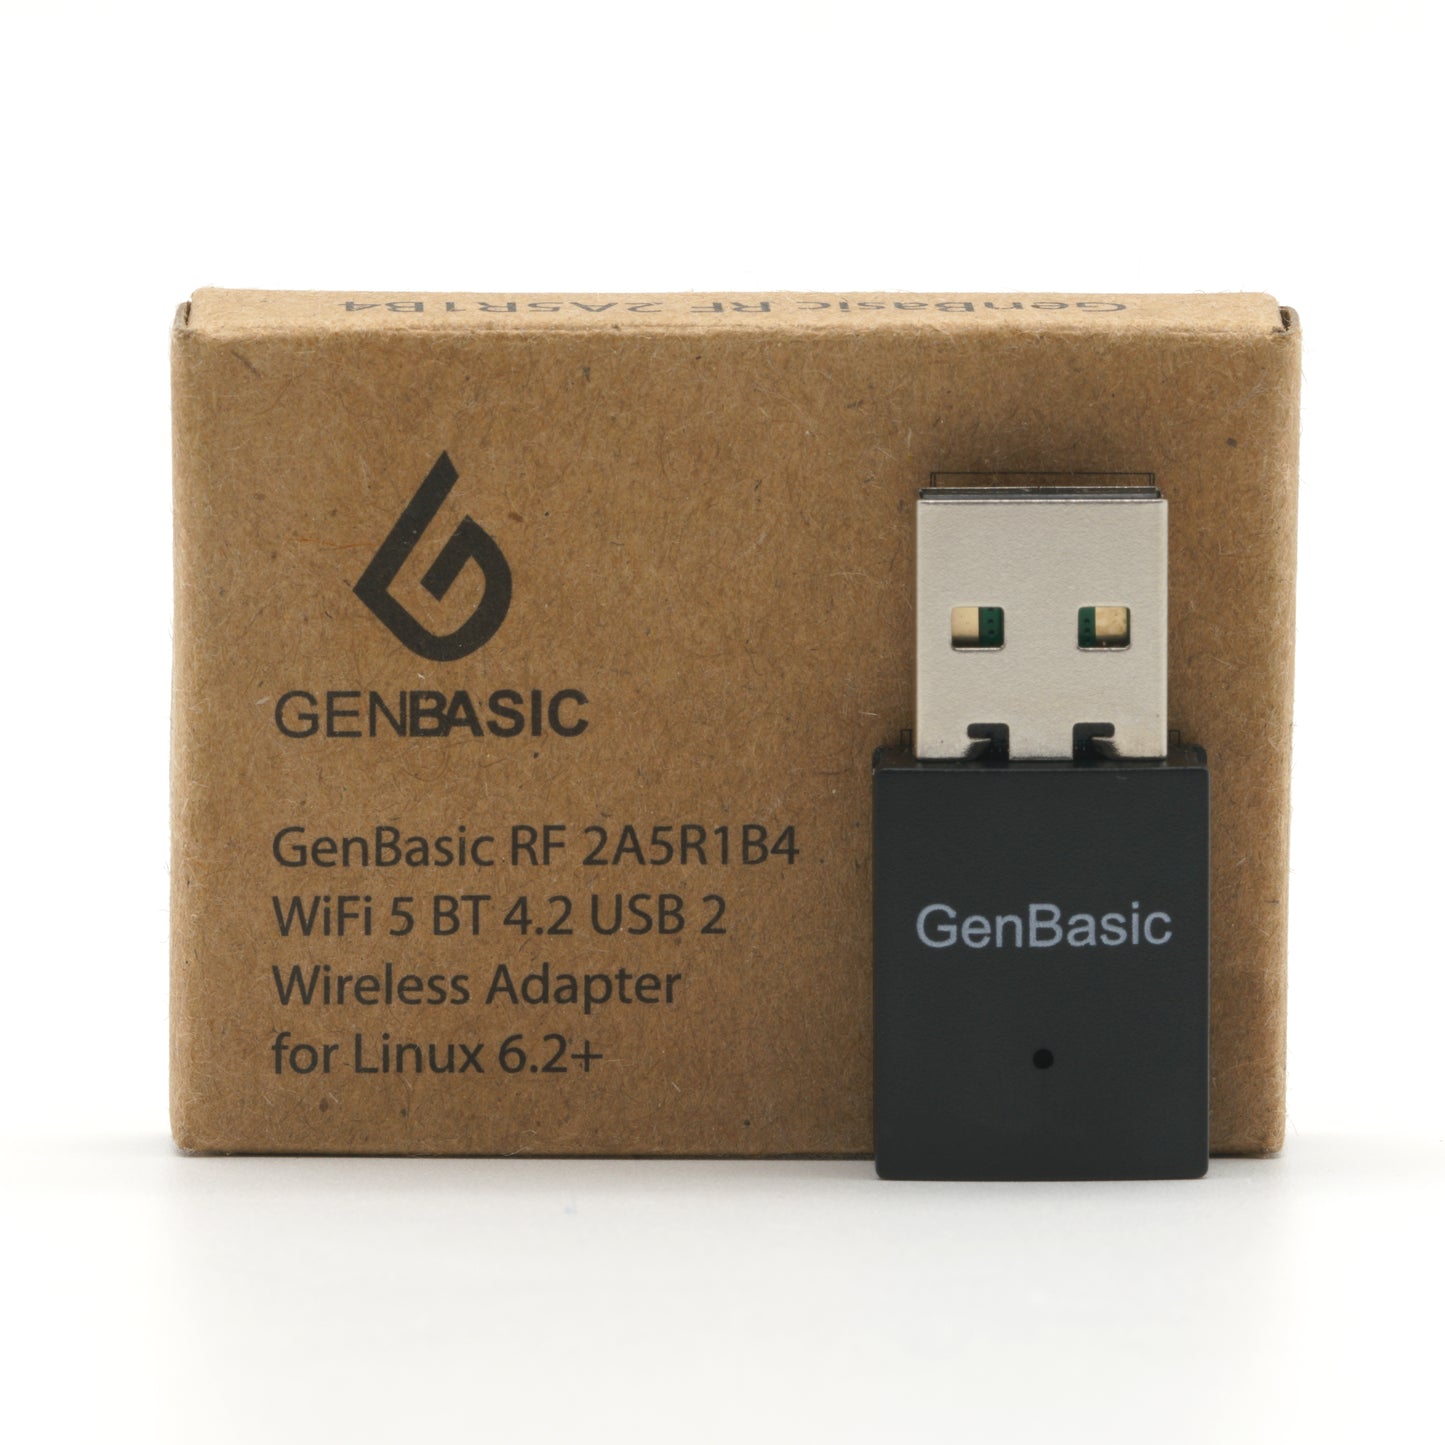 GenBasic WiFi 5 BT 4 USB Mini Wireless Network Dongle Adapter for Linux 6.2+